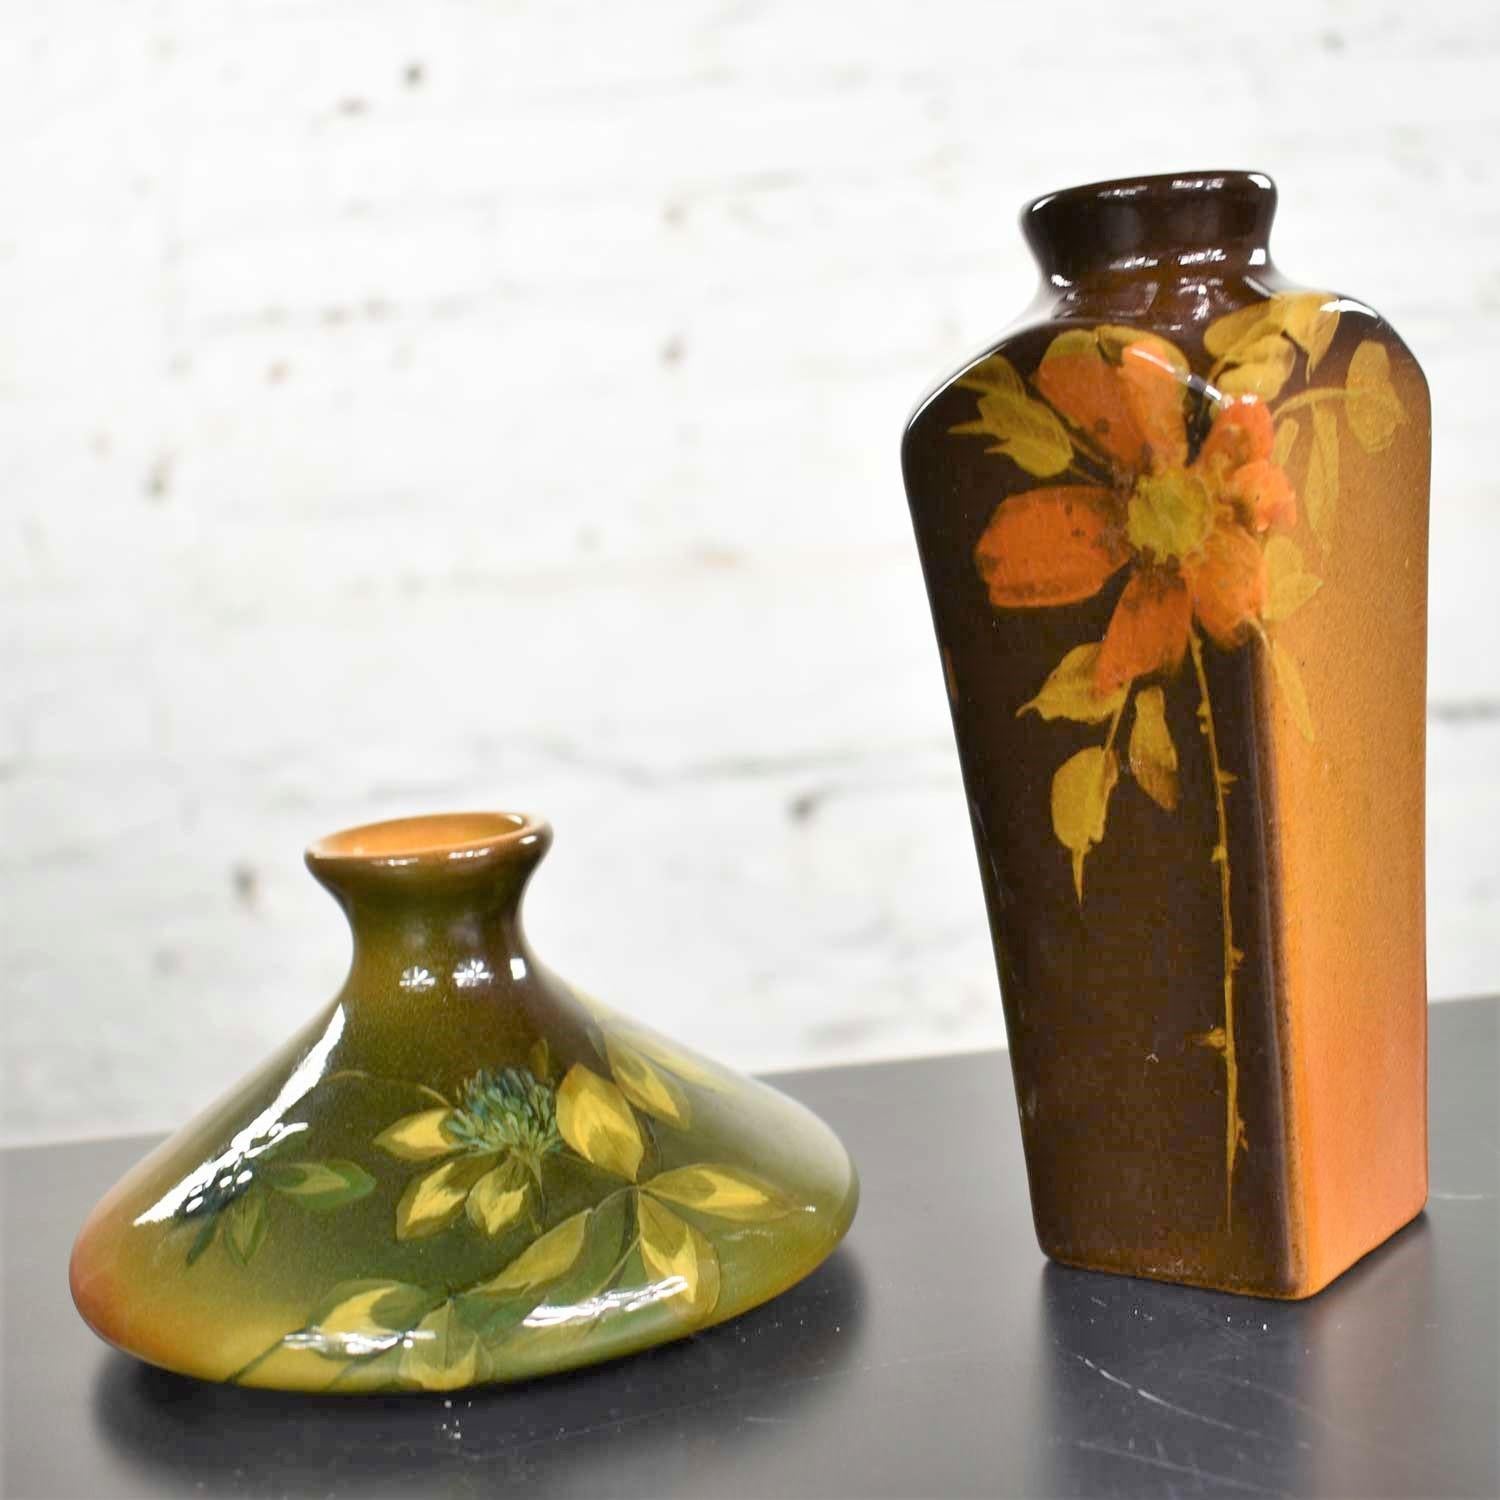 Handsome pair of petite antique Arts & Crafts floral pattern vases. One vase by Olga Geneva Reed for Rookwood Pottery and one J.B. Owens Pottery vase. Both with floral decoration. They are both in excellent vintage condition. No chips, cracks,